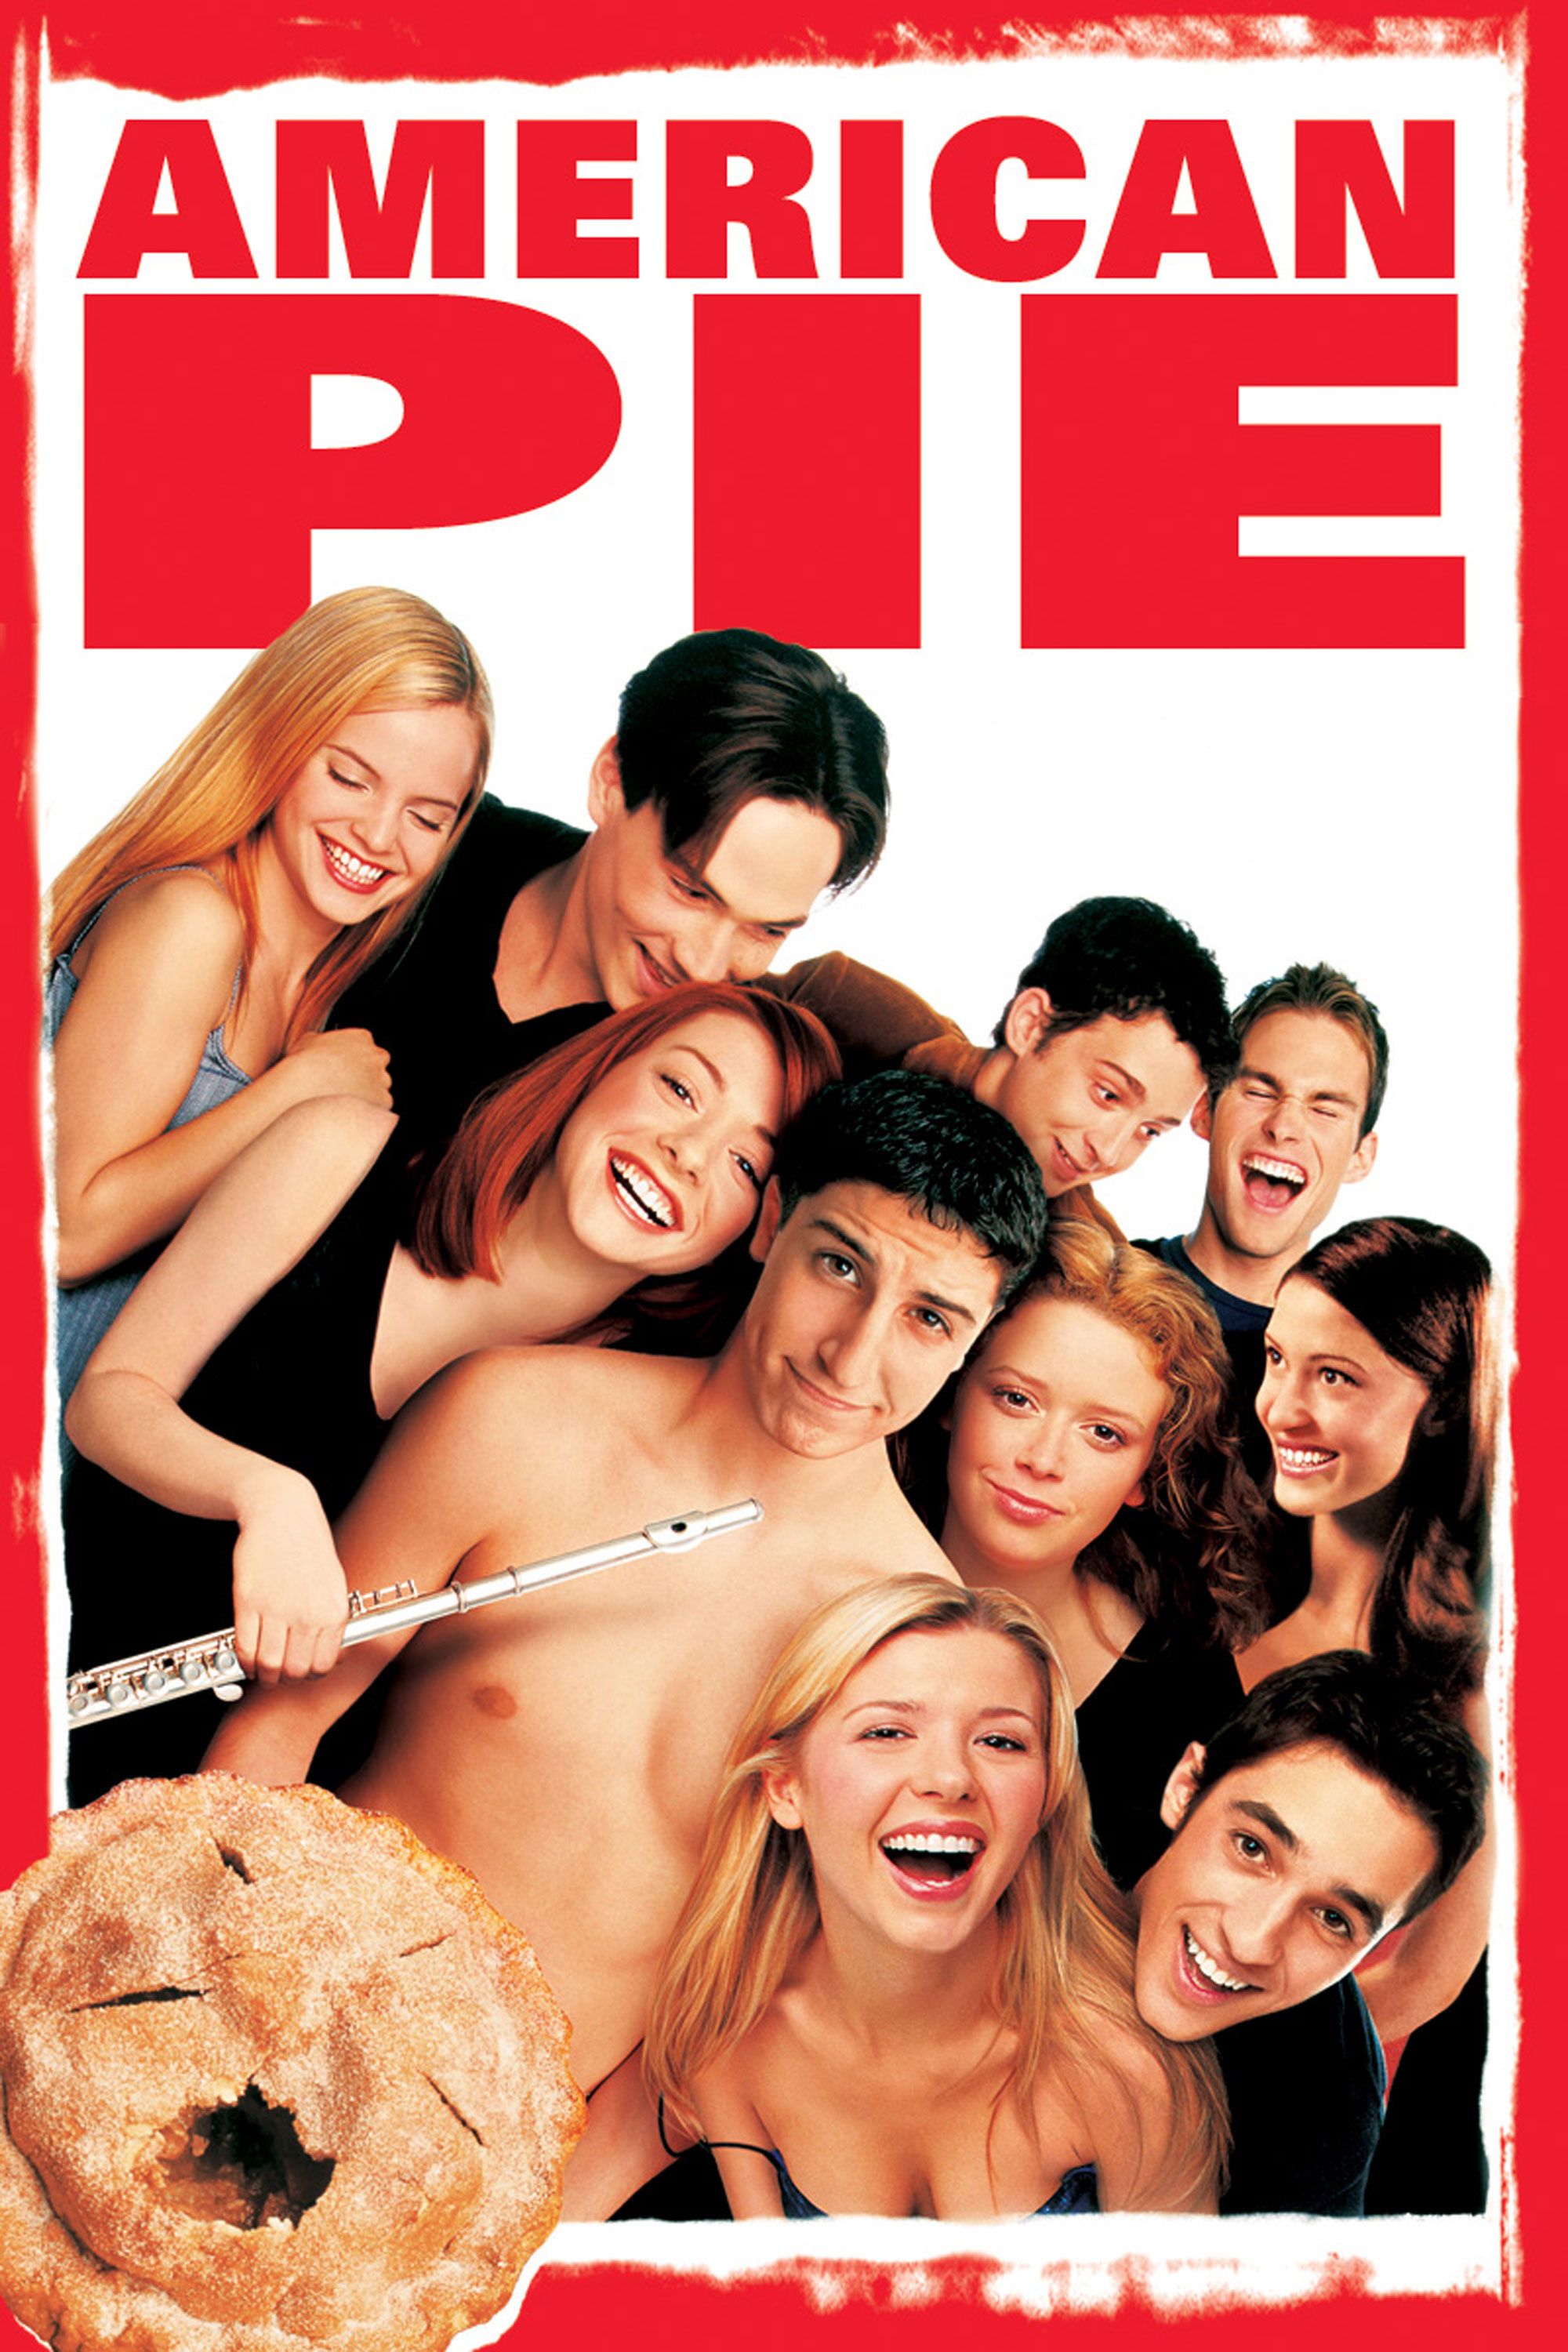 dana graham recommends american pie full free pic